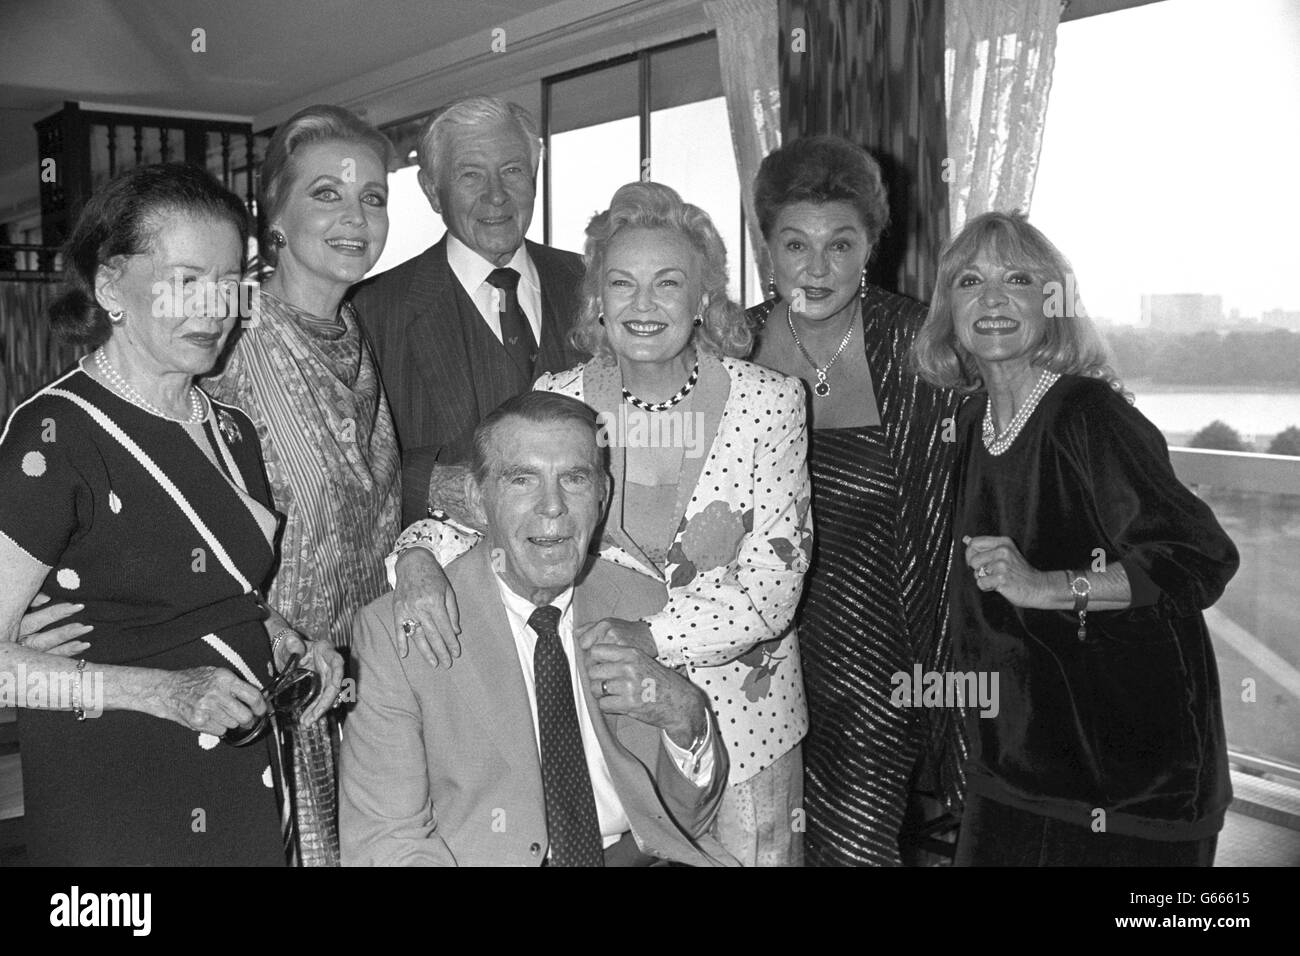 Hollywood stars of the 40s and 50s attend a party in London, before they board a luxury liner for an 8-day cruise to New York, on which a film festival is taking place. (l-r) Joan Bennett, Anne Jeffreys, Senator George Murphy, Fred MacMurray (front), June Haver, Esther Williams and Beverley Garland. Stock Photo